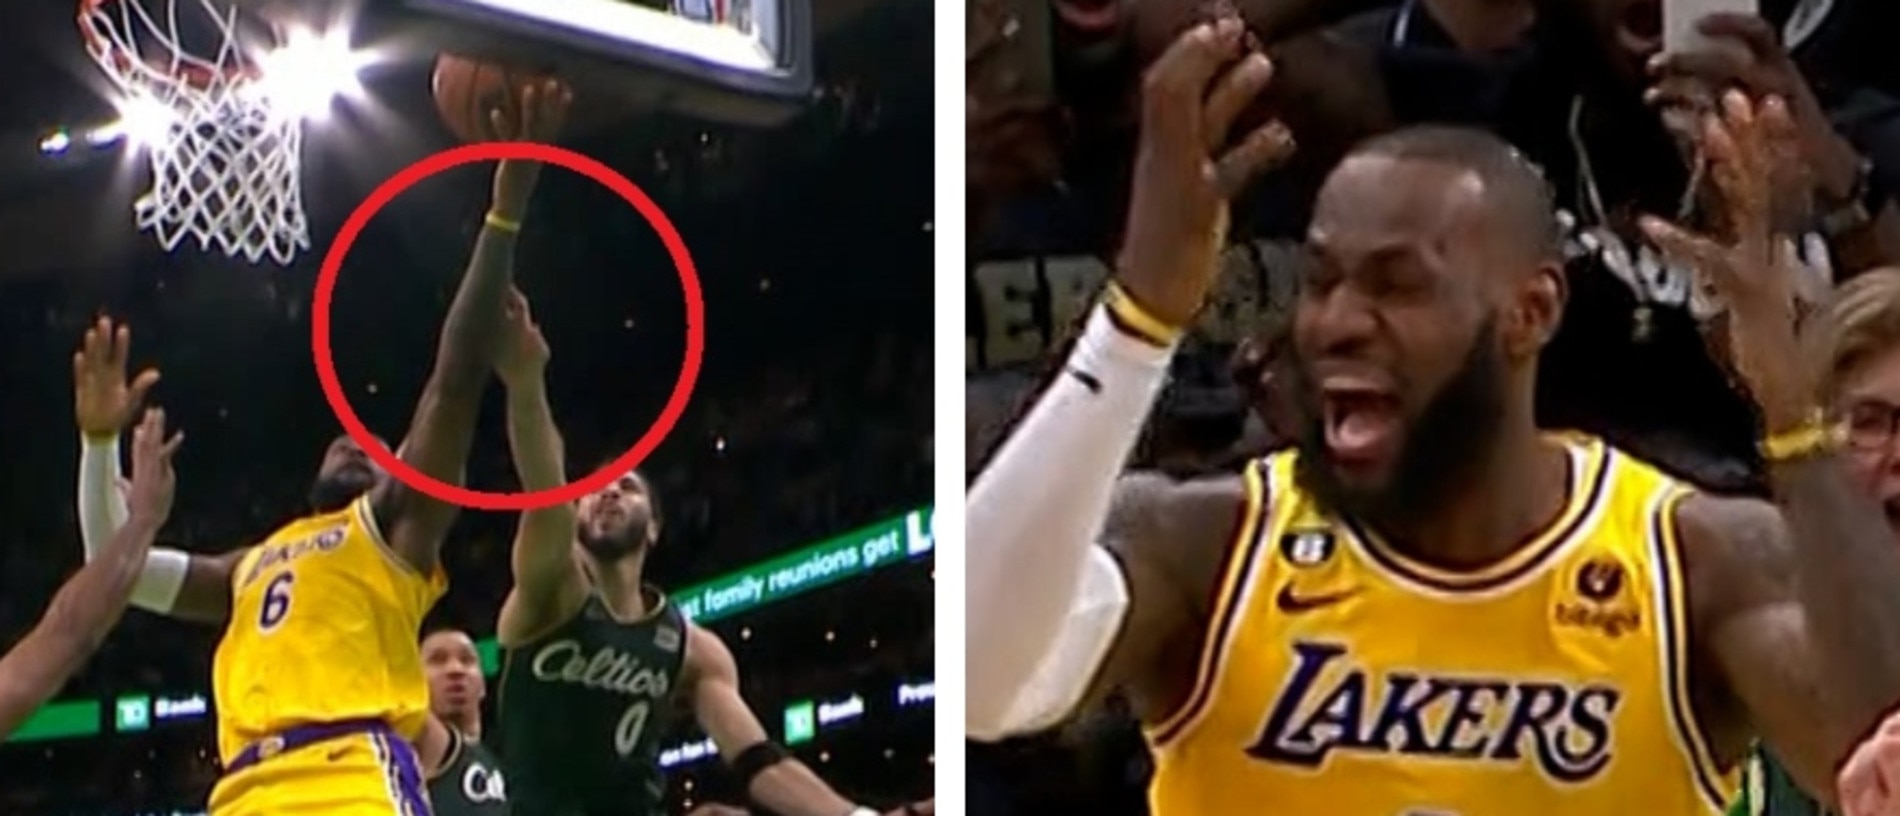 Bad reffing didn't beat the Lakers—the Celtics did. - The Berkeley Beacon